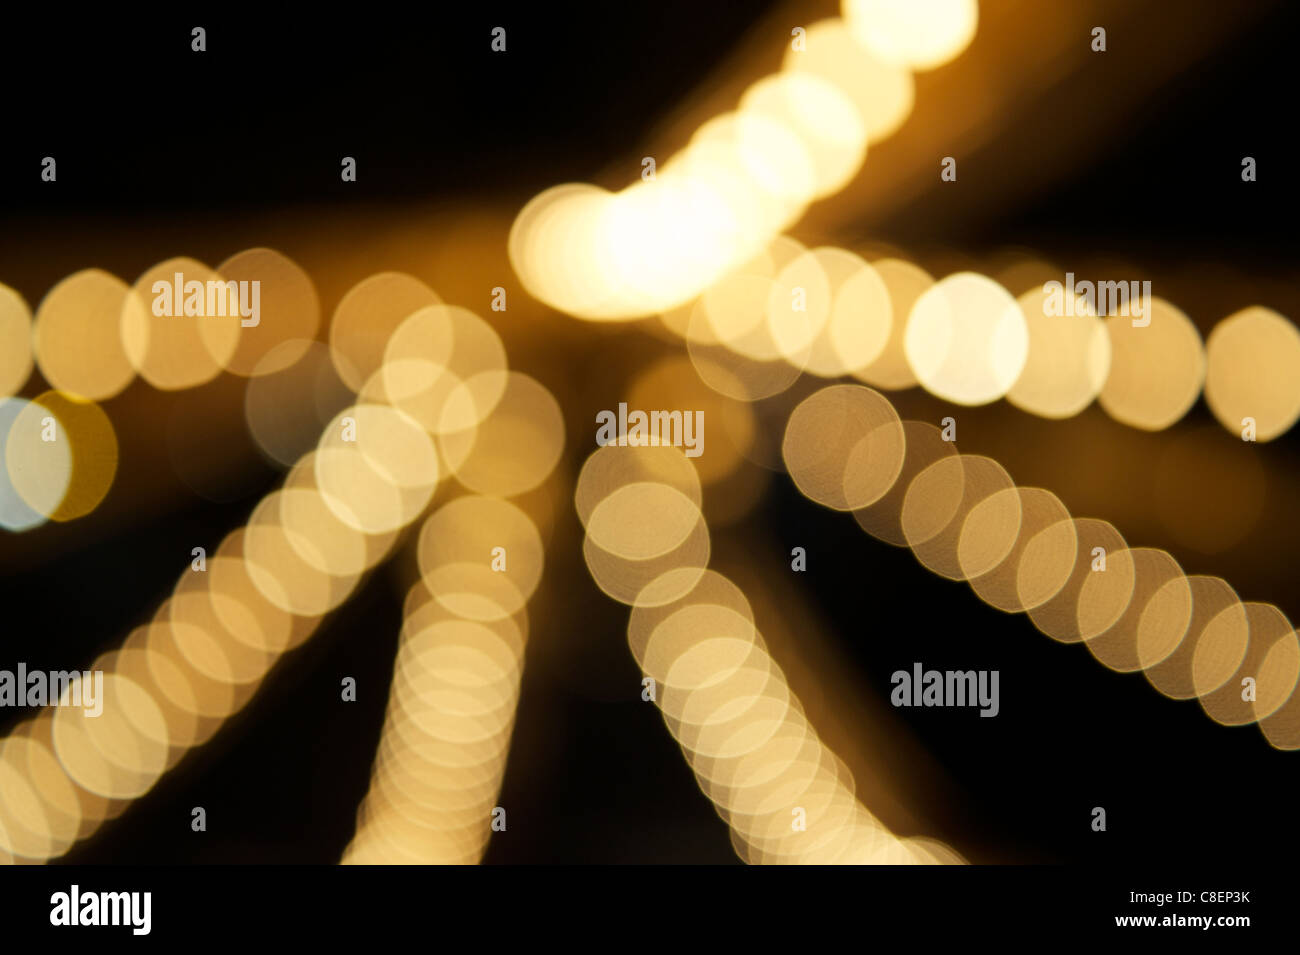 Abstract out of focus background of strings of lights Stock Photo